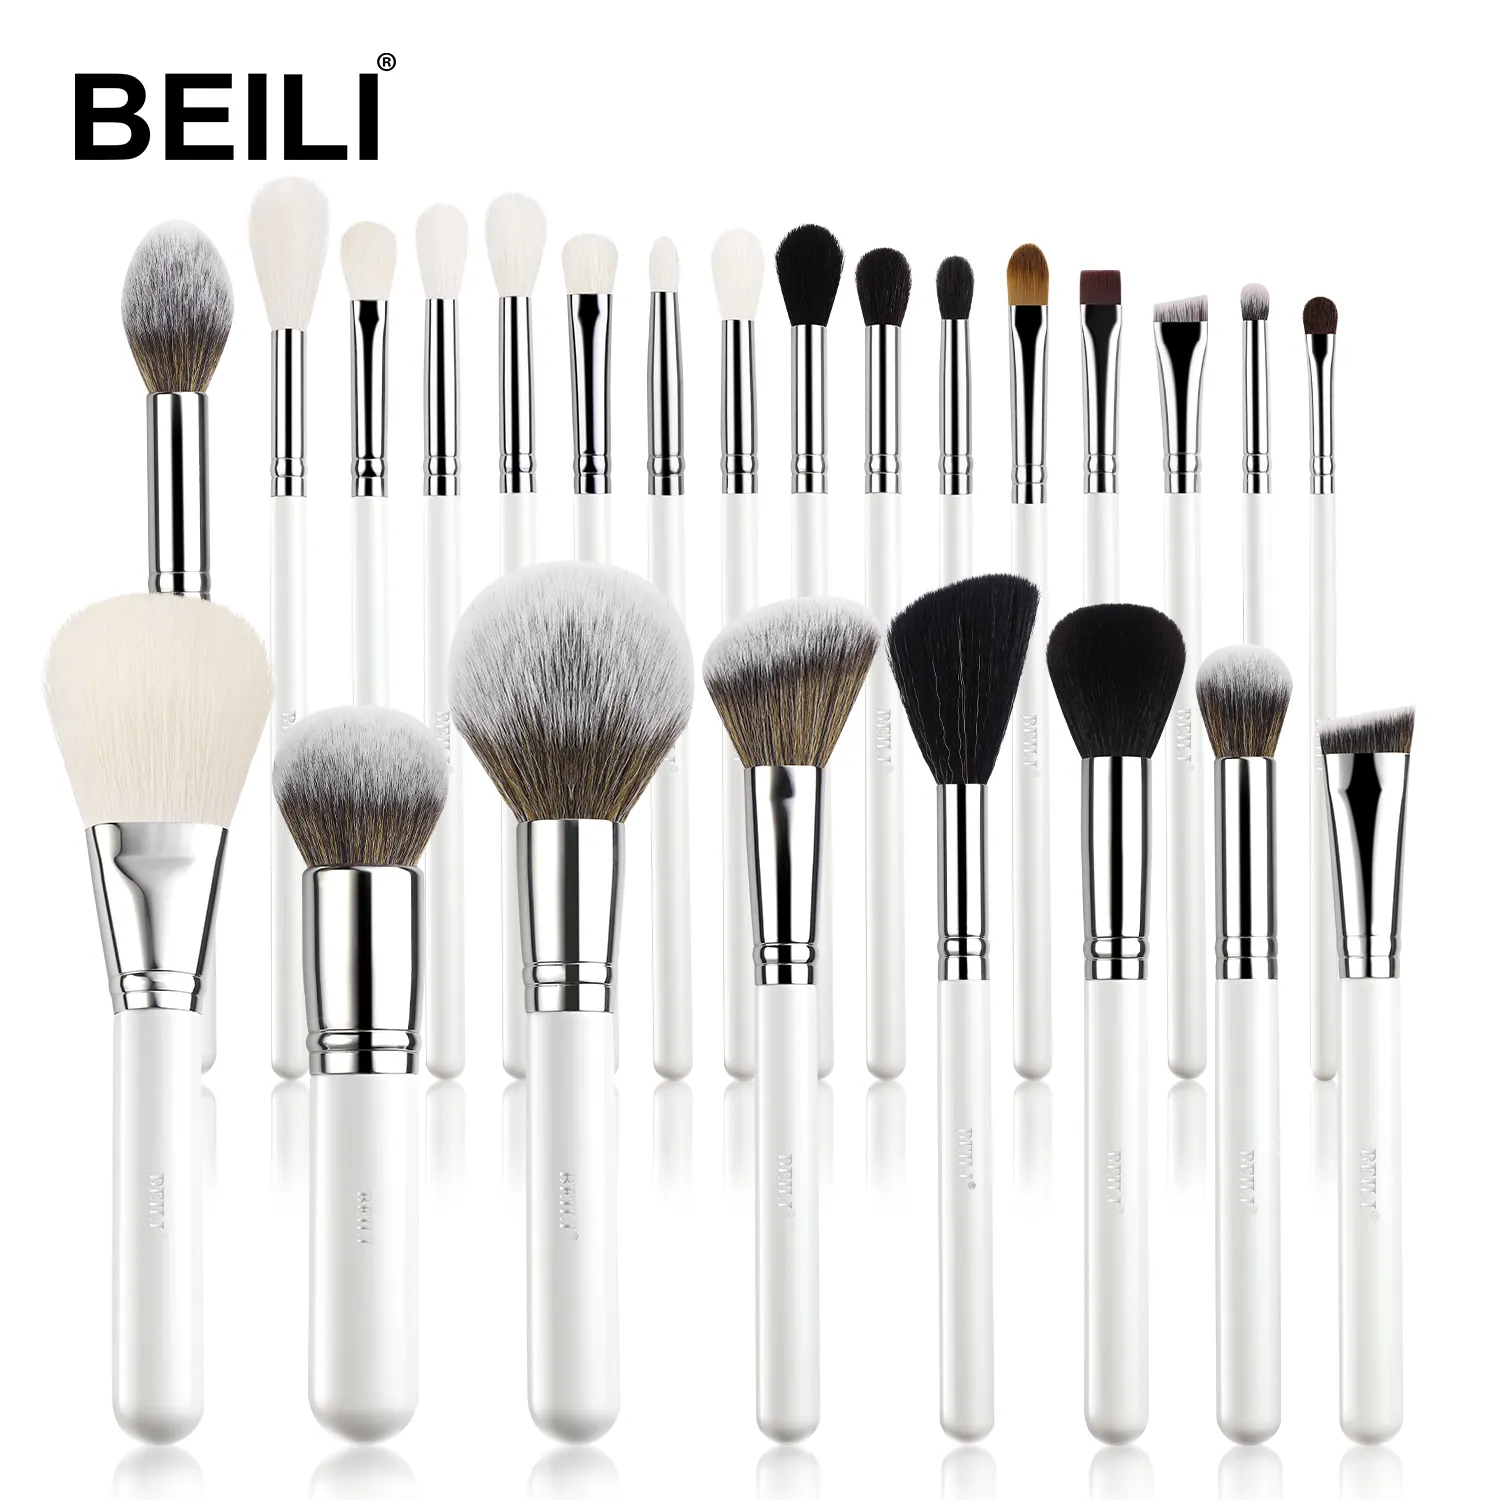 BEILI Customization makeup brushes 24Pcs Good Quality Luxury Cosmetic Makeup Brush Set Kit Synthetic hair private label